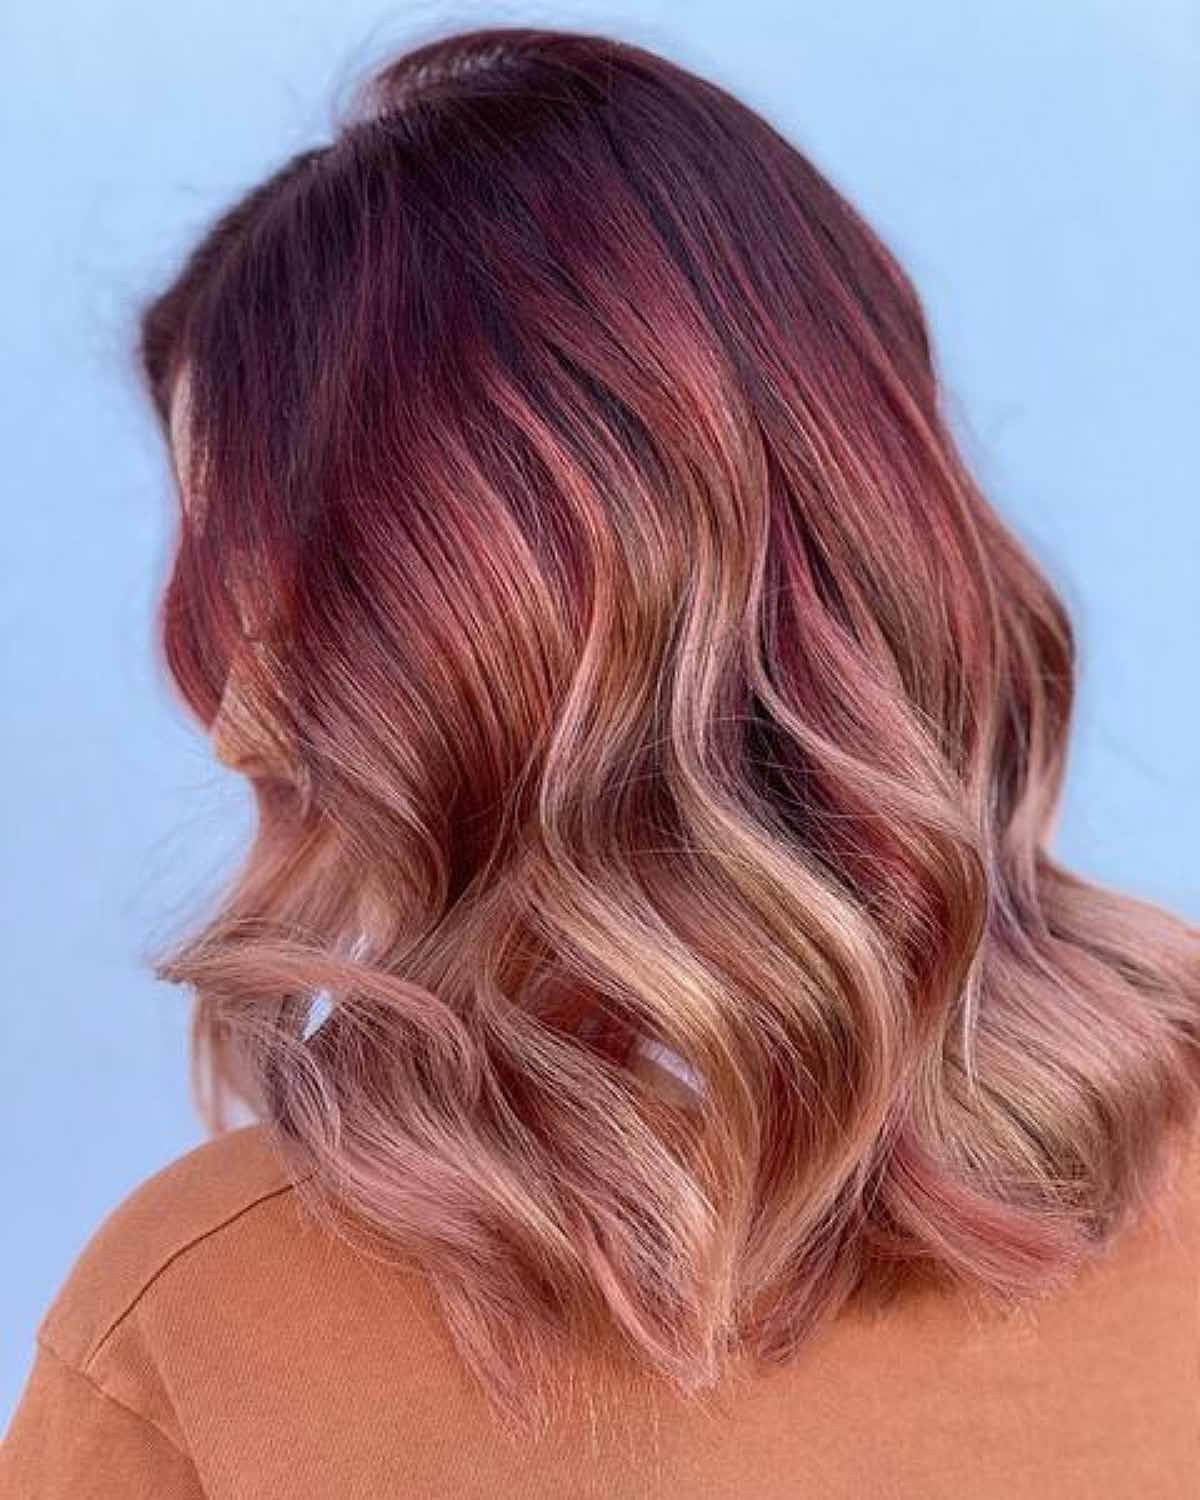 red and blonde ombre